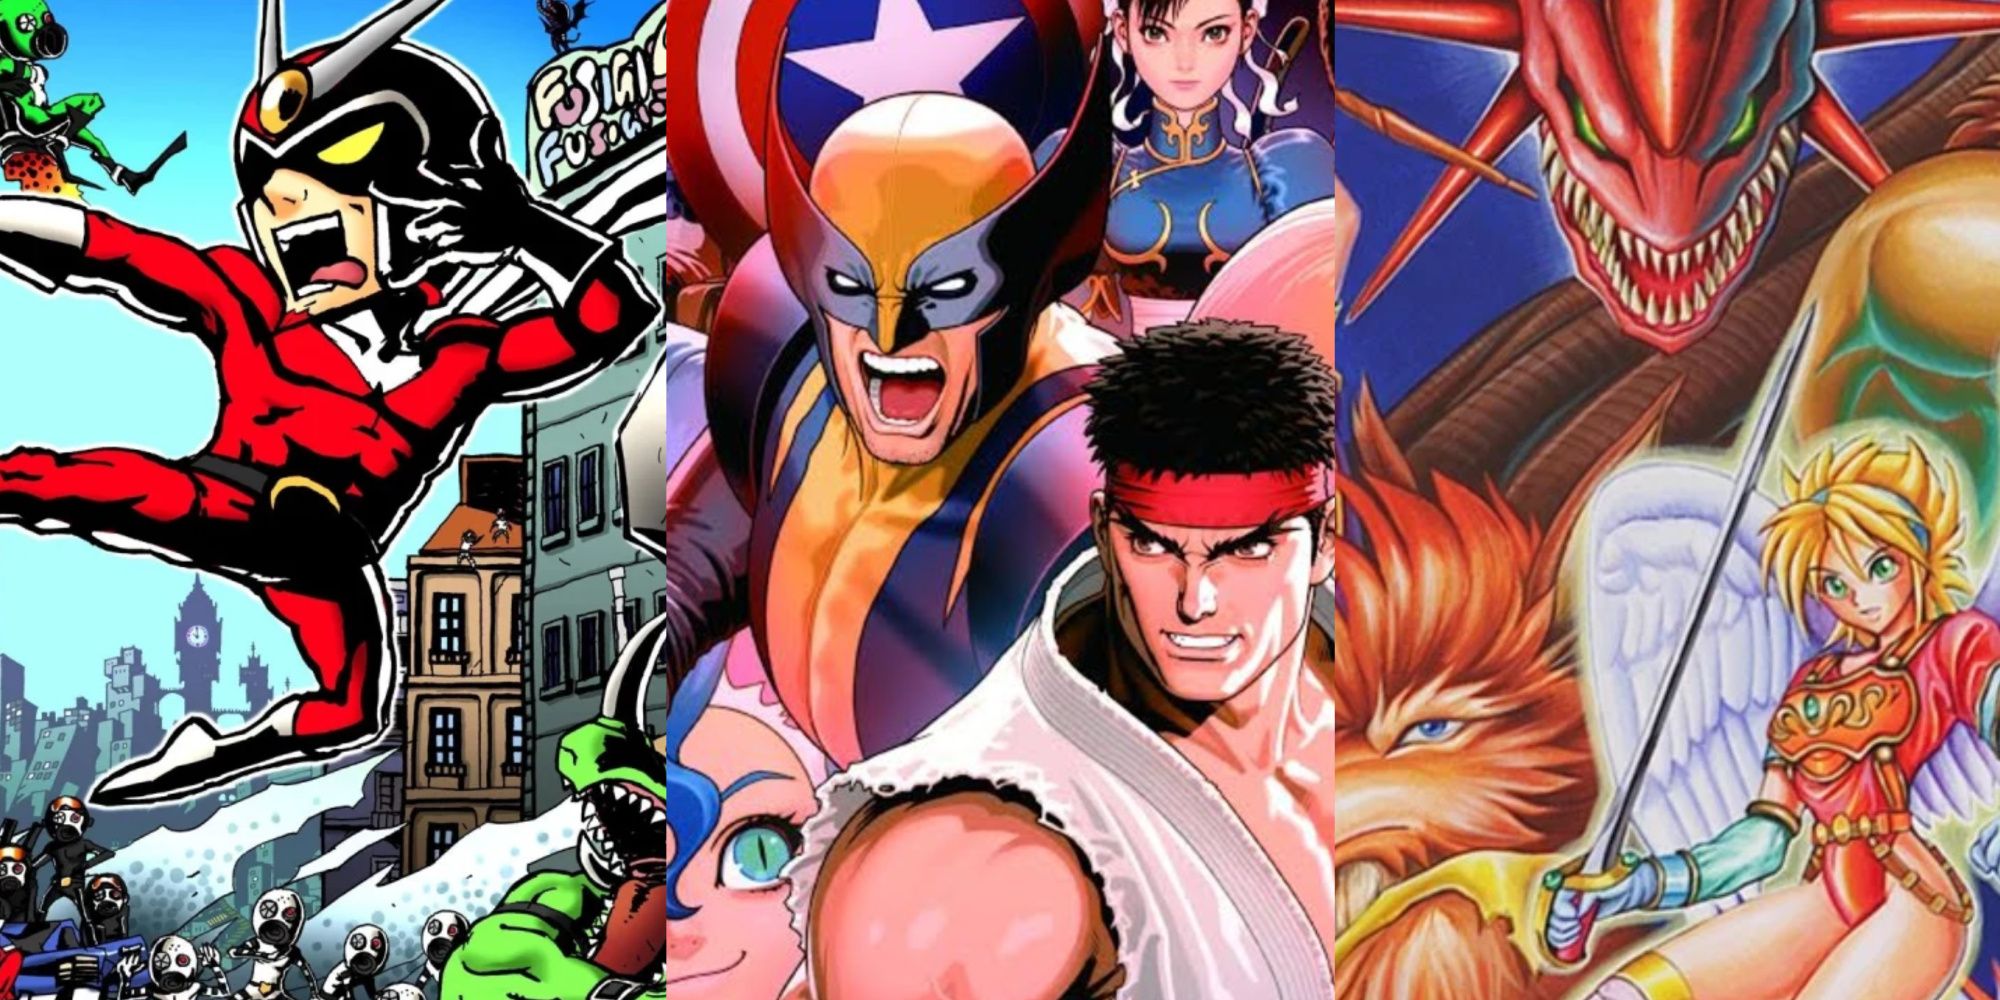 A collage showing three Capcom series: Viewtiful Joe, Marvel vs Capcom, and Breath of Fire.